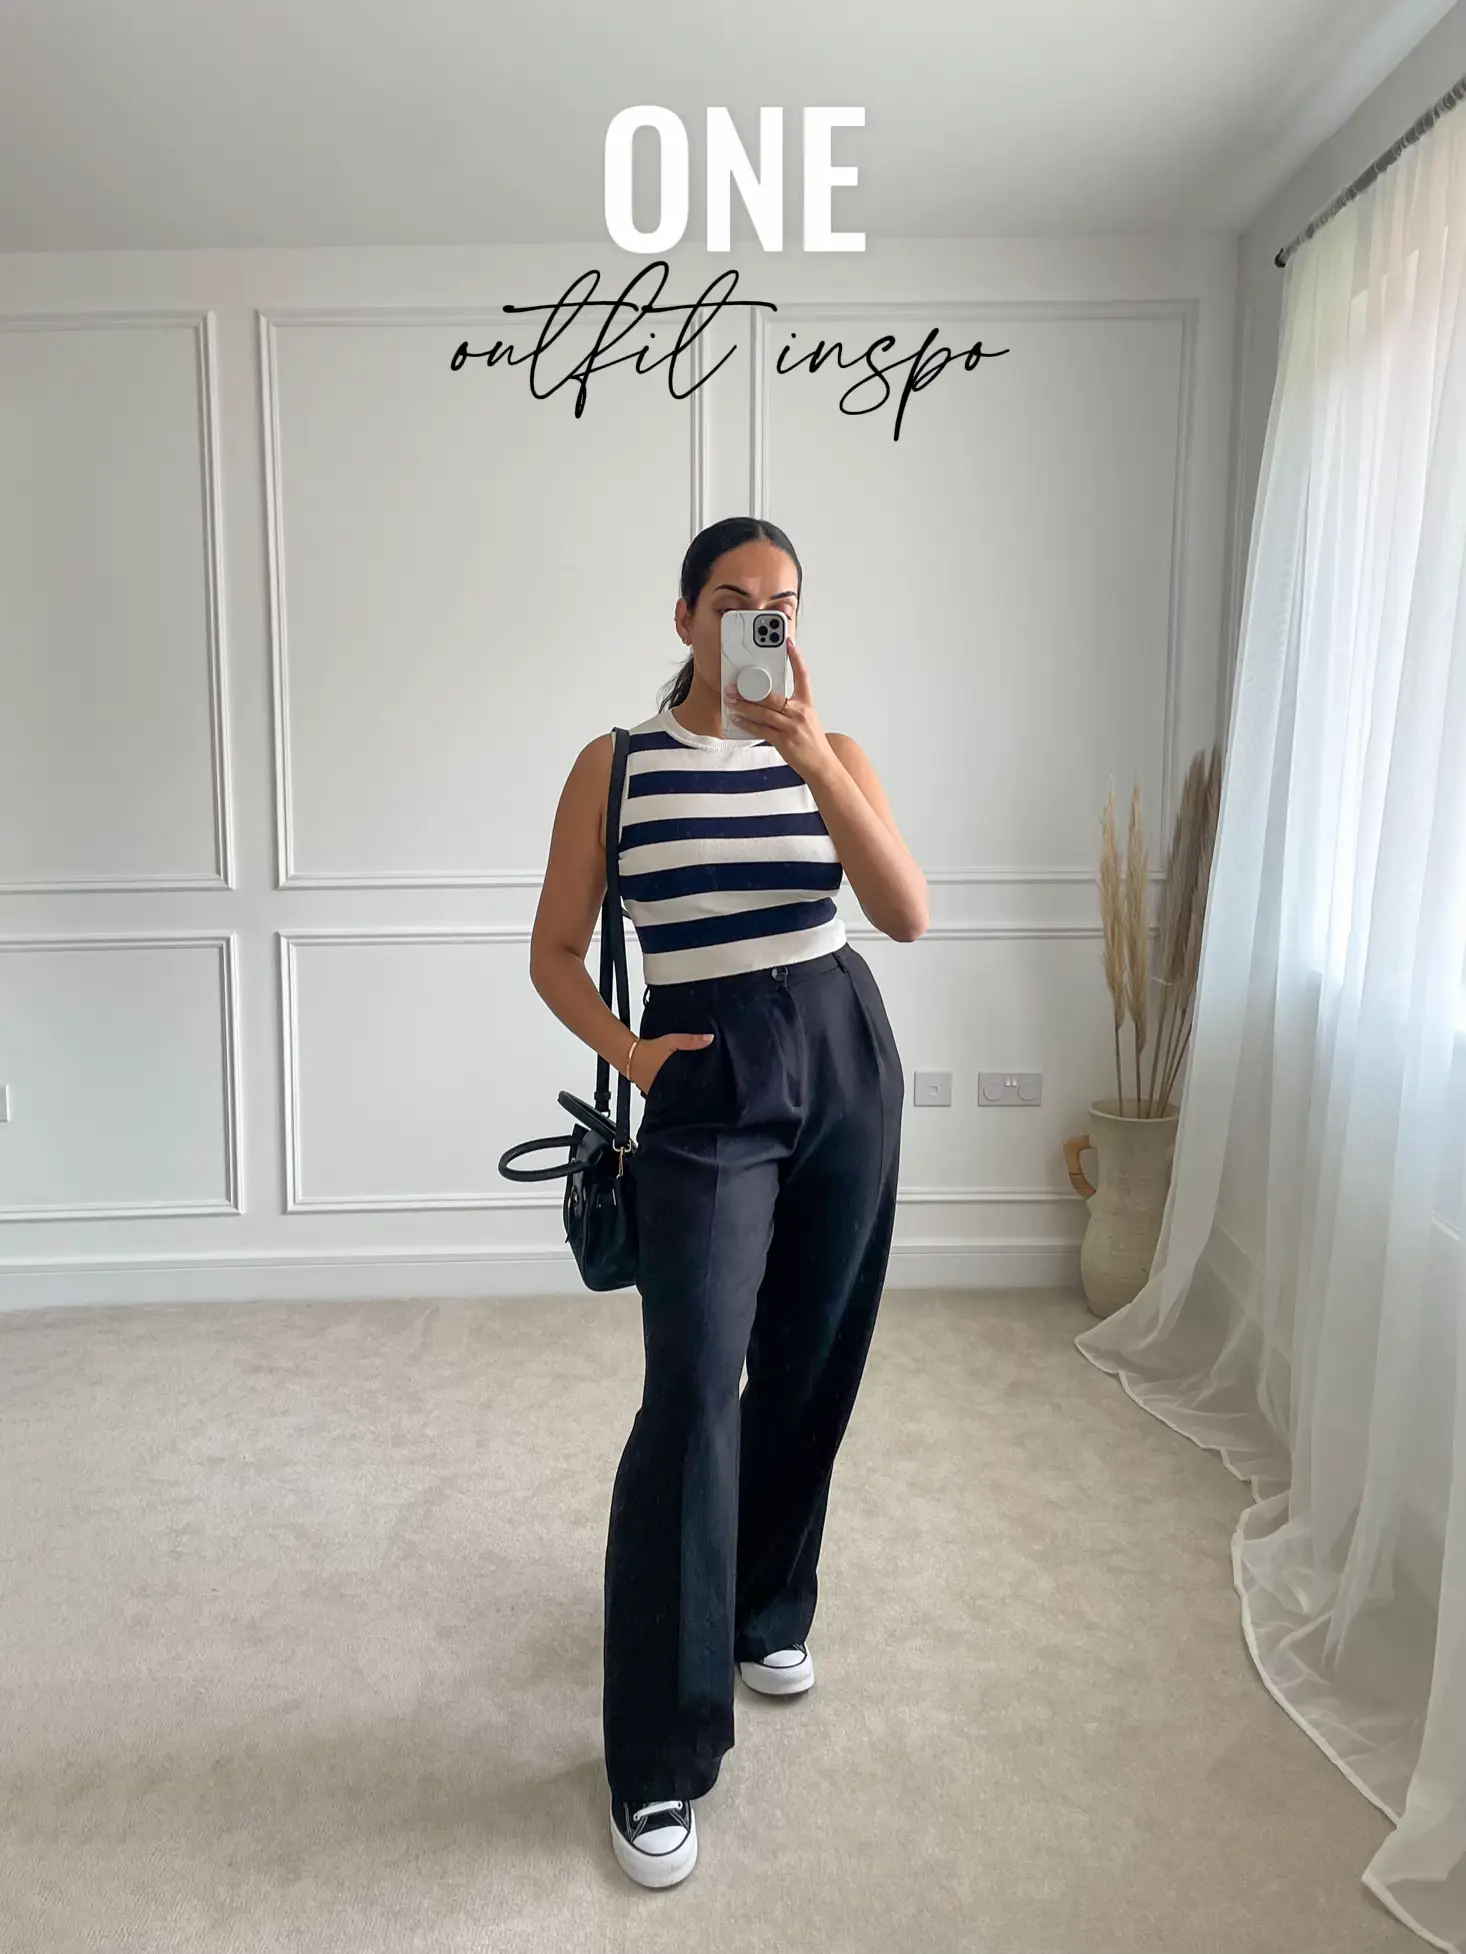 5 Ways To Style Black Wide Leg Trousers 🖤